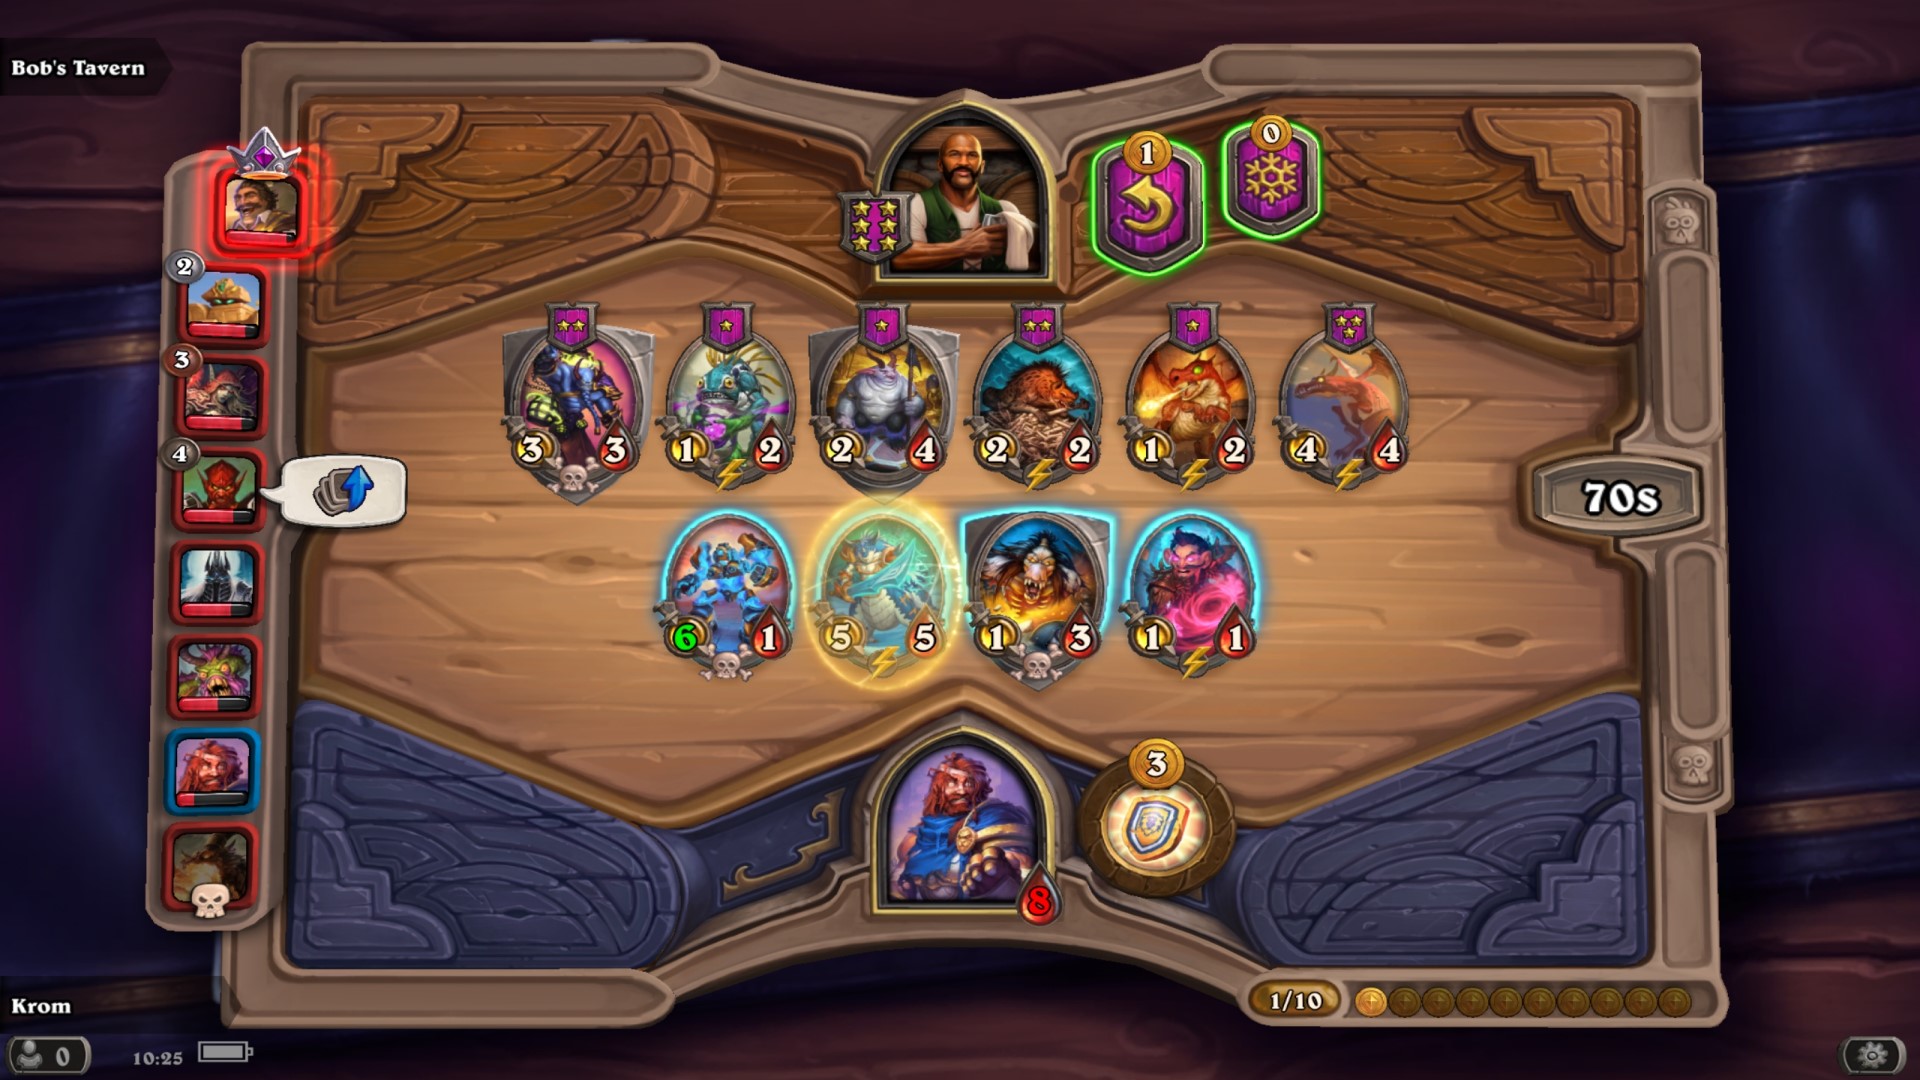 Best mobile multiplayer games: Hearthstone. Image shows a game in progress.